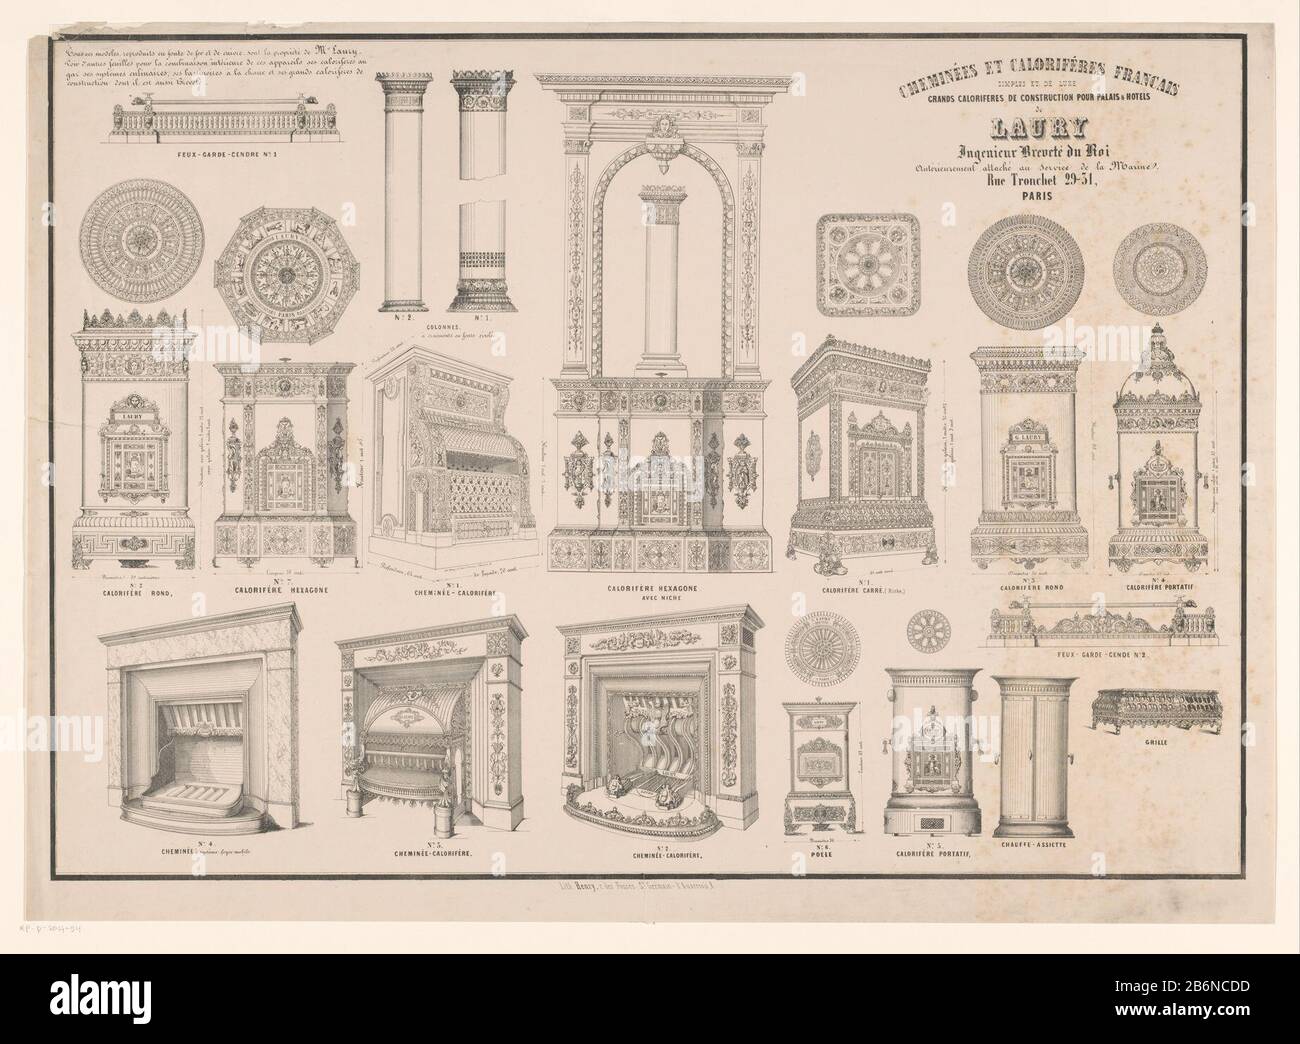 Pictured are complete fireplaces and stoves, components and decorative elements. The parts are numbered. Top right name and address of the manufacturer: Laury. Manufacturer : printmaker: Henry (printmaker) (listed building) printer: Brothers van Lier Place manufacture: printmaker: Paris Publisher: The Hague Date: 1844 Material: paper Technique: lithography (technique) Dimensions: sheet: h 510 mm × W 695 mm Subject: open hearth, fire-place radiator (central heating) Stock Photo